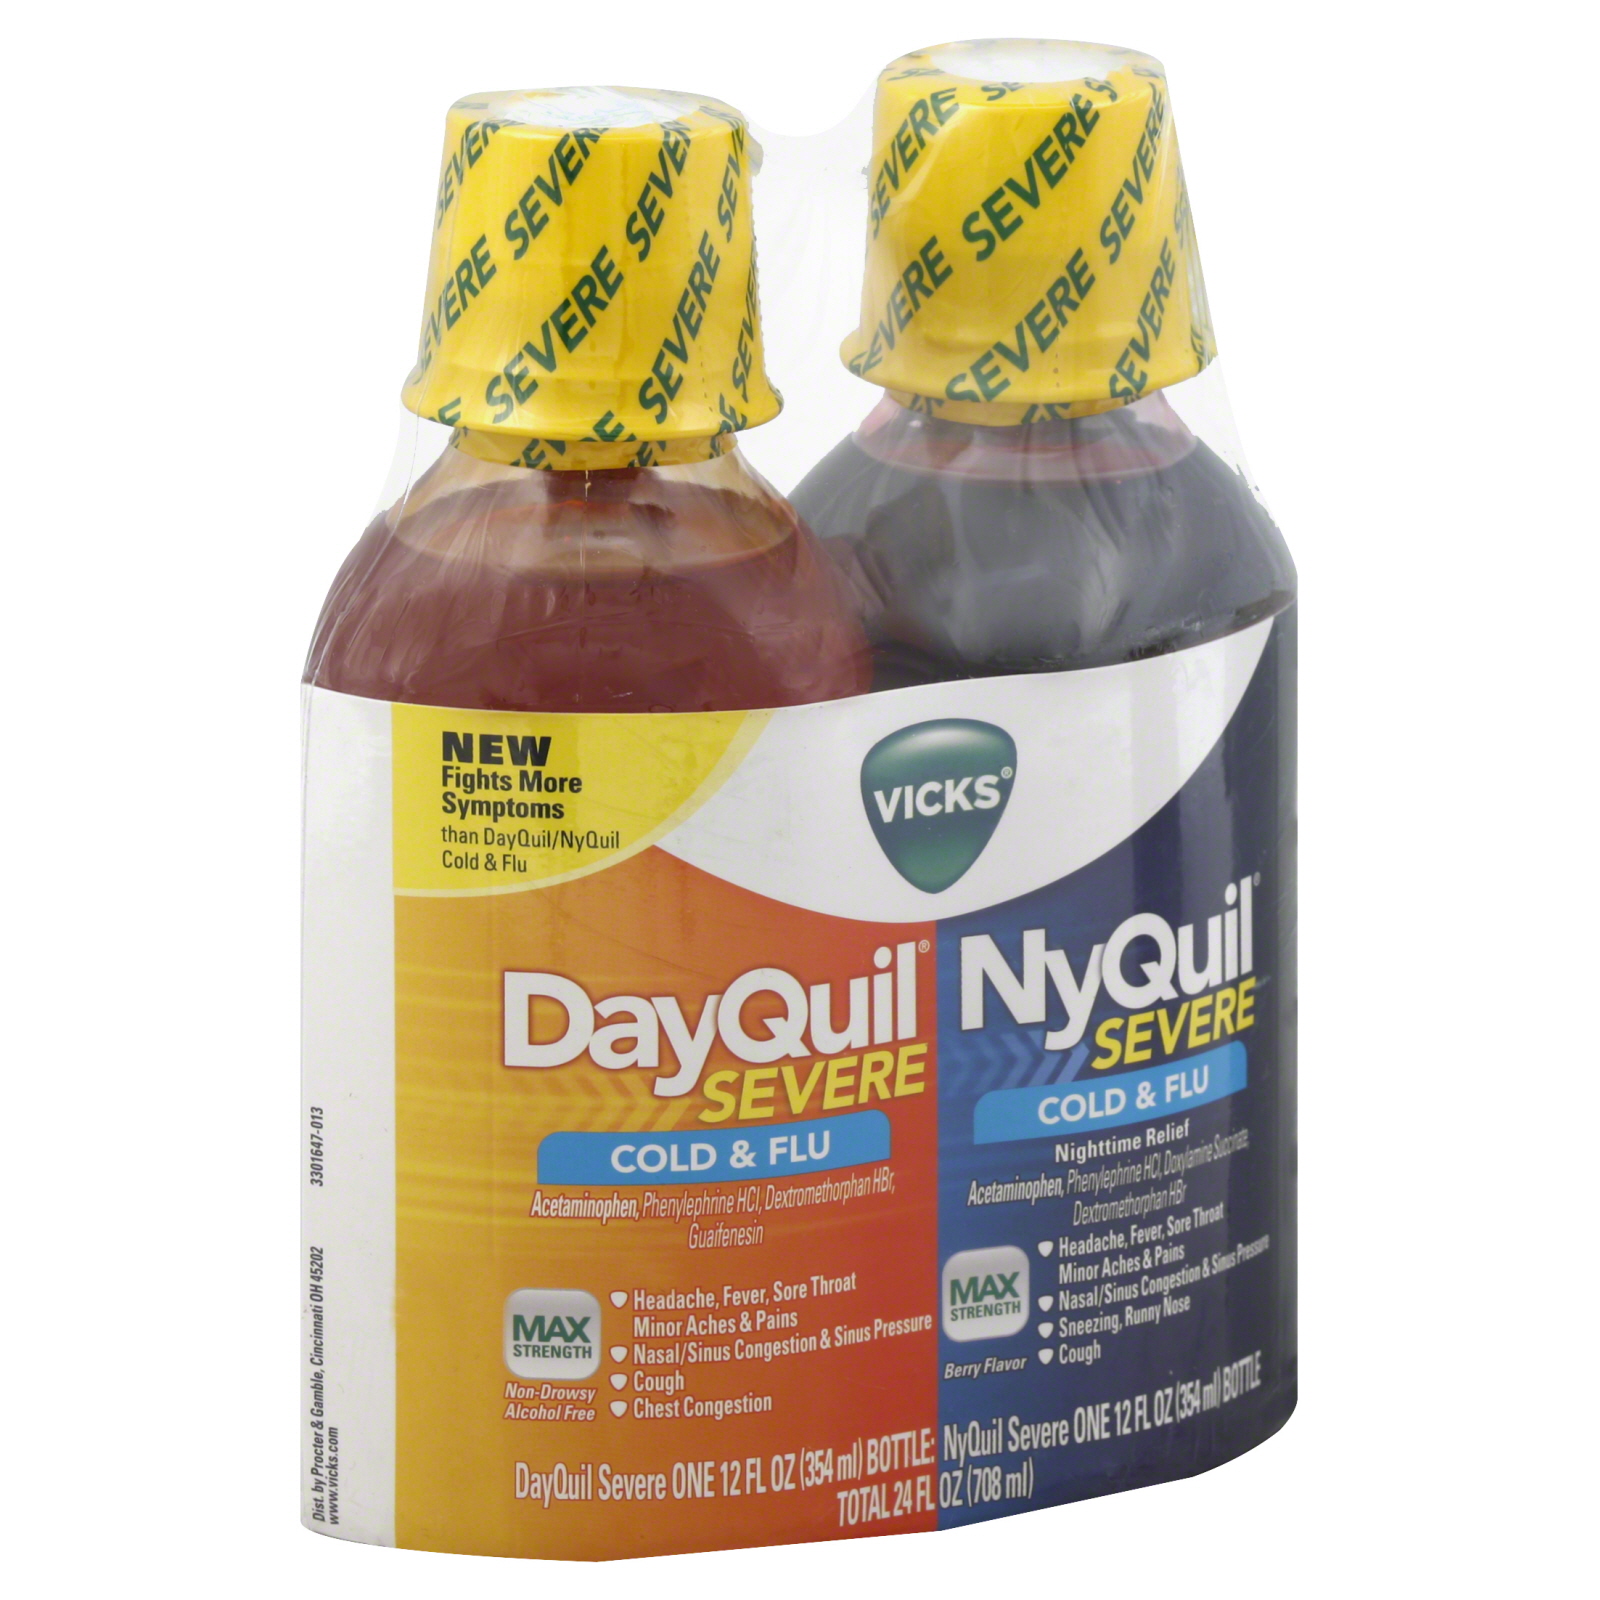 DayQuil NyQuil, Cold & Flu, Severe, Max Strength, 24 fl oz (708 ml)